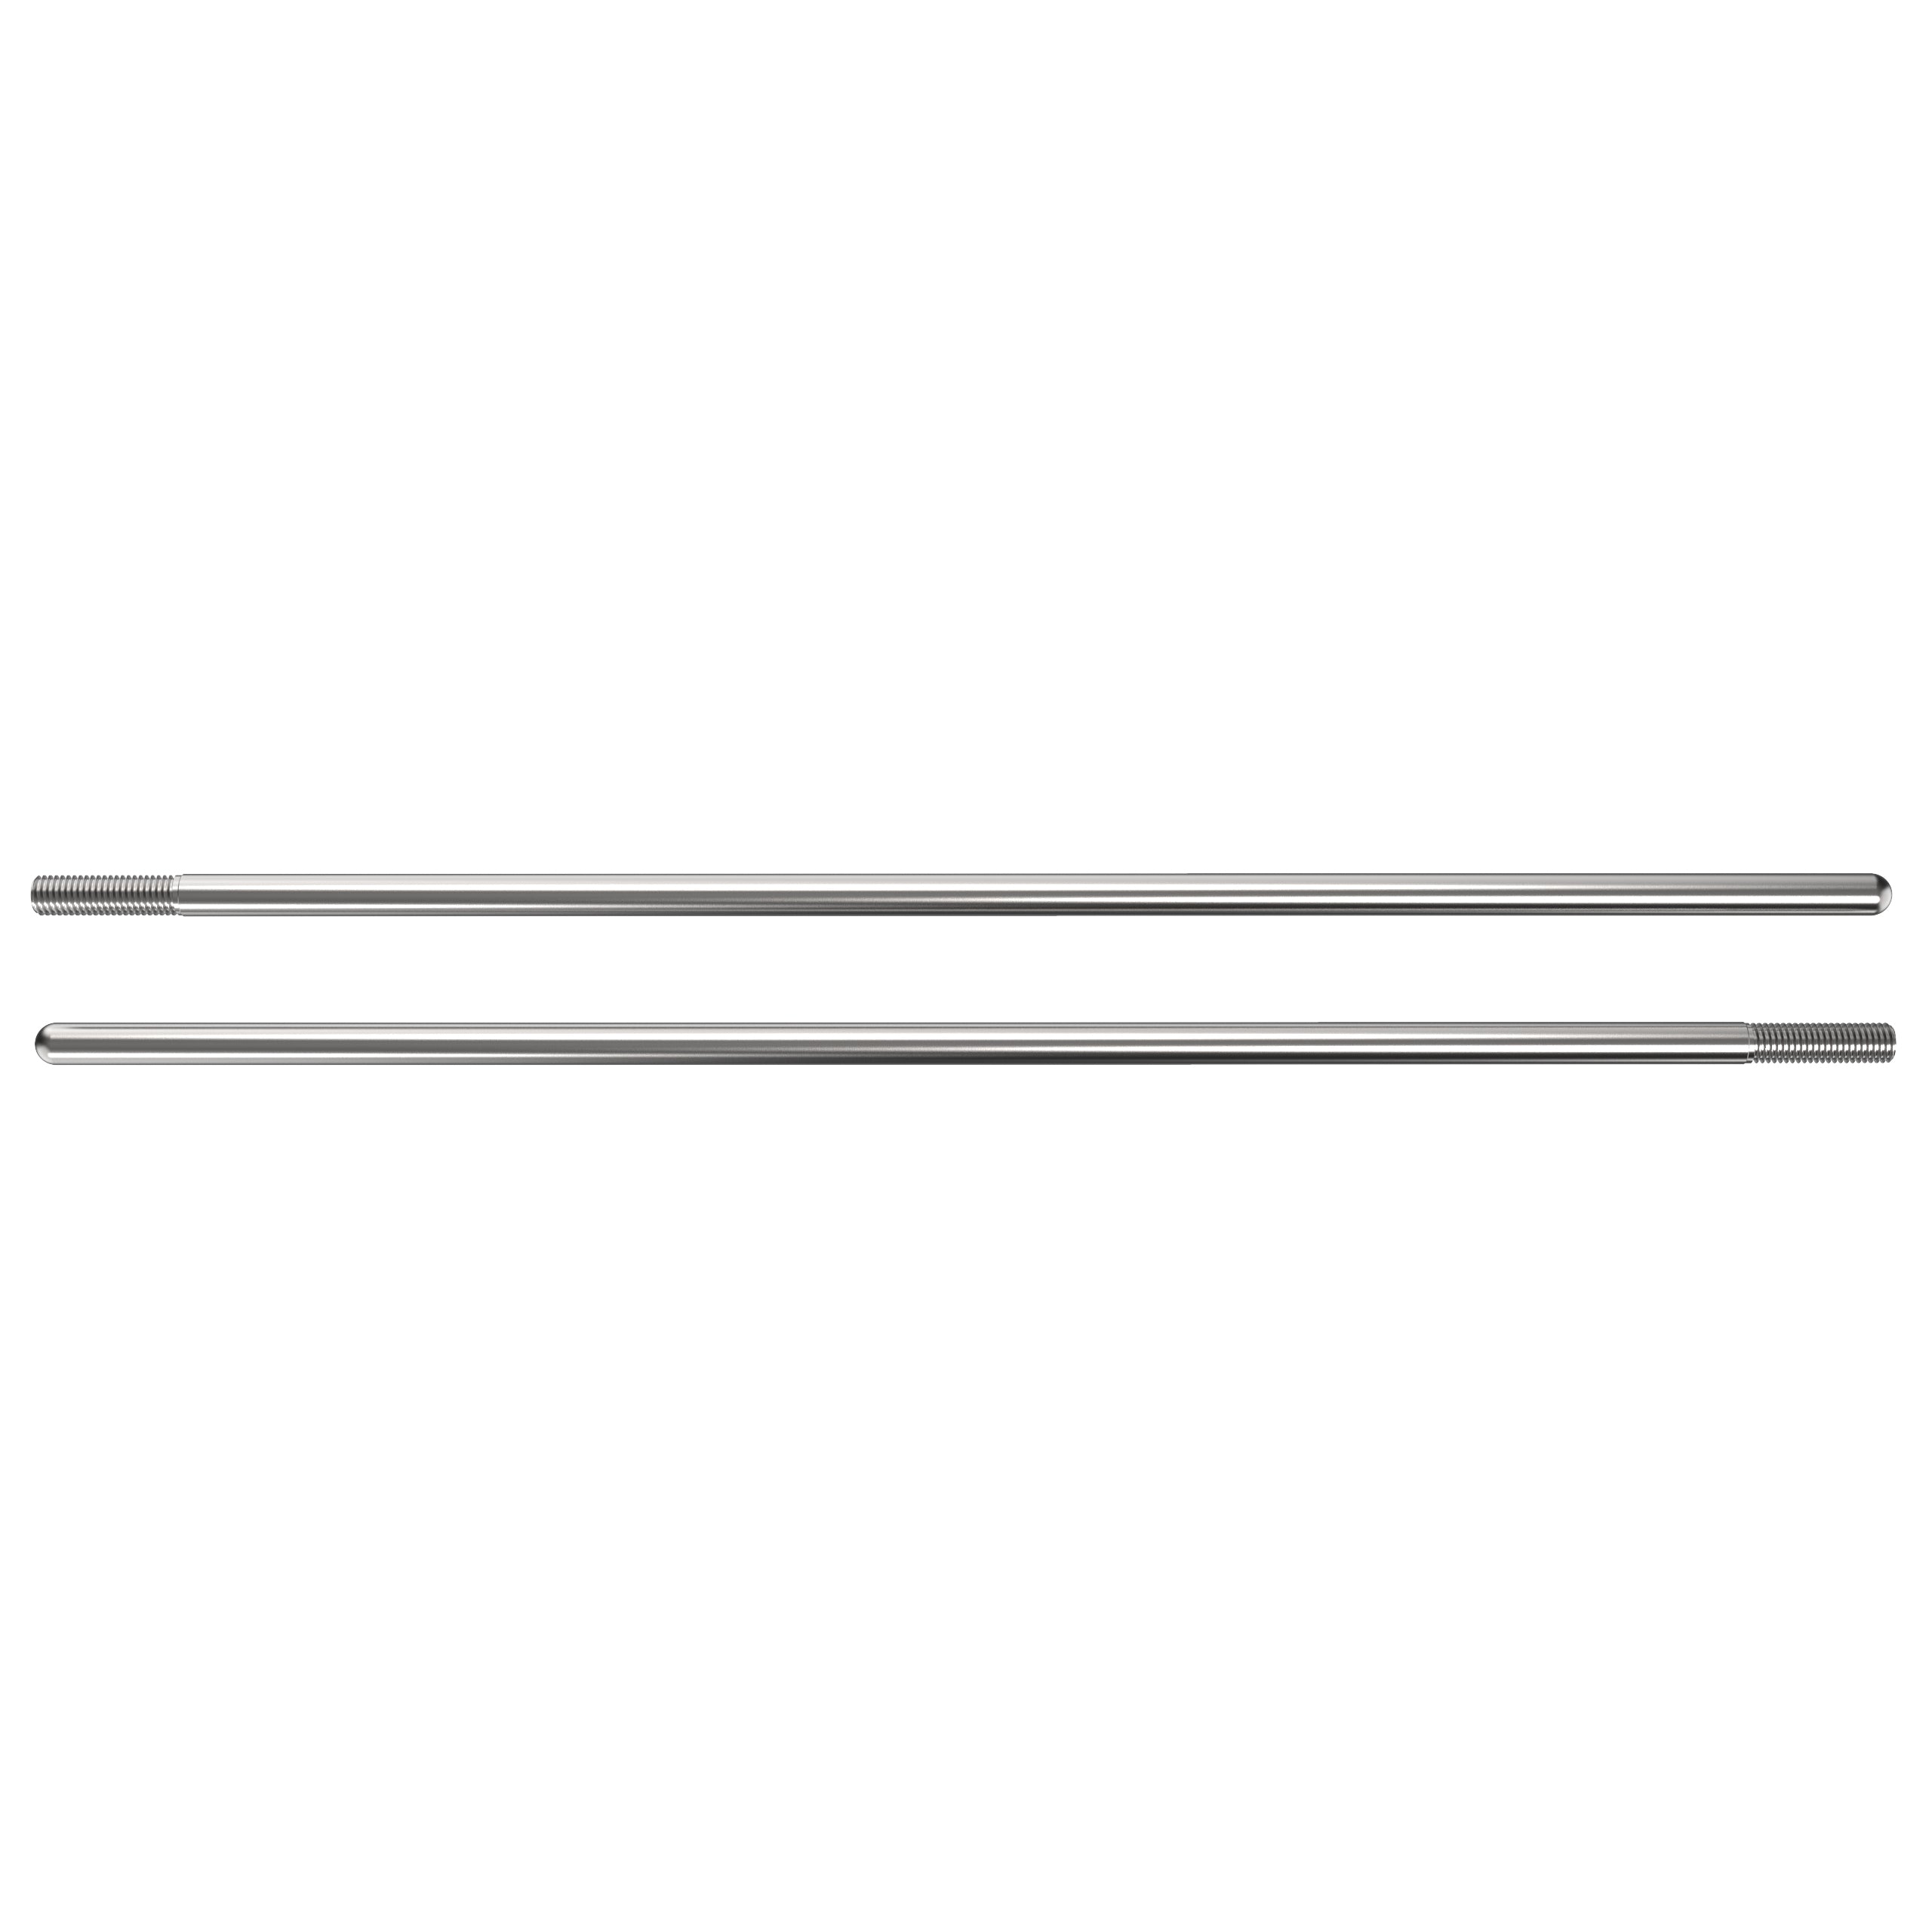 12" Guide Rods